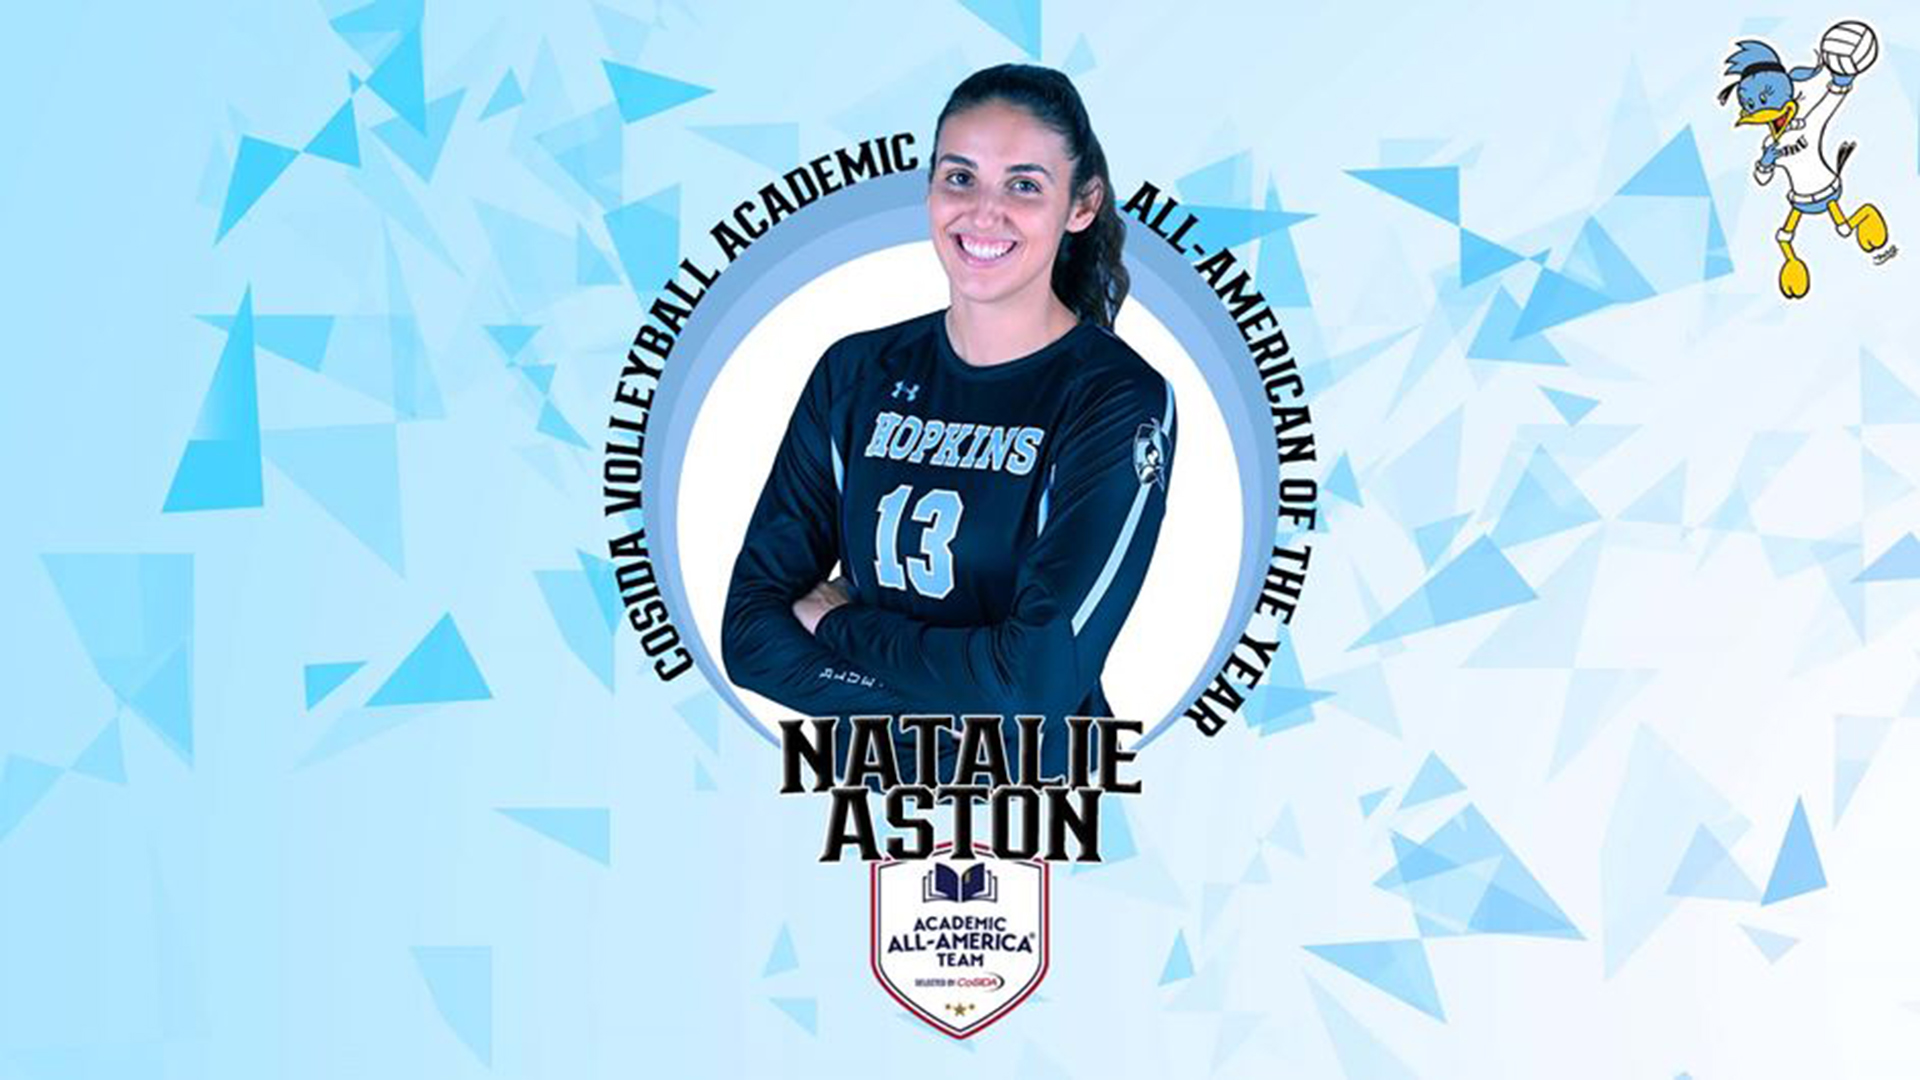 Johns Hopkins' Aston Named CoSIDA Academic All-American of the Year; Three Blue Jays Honored